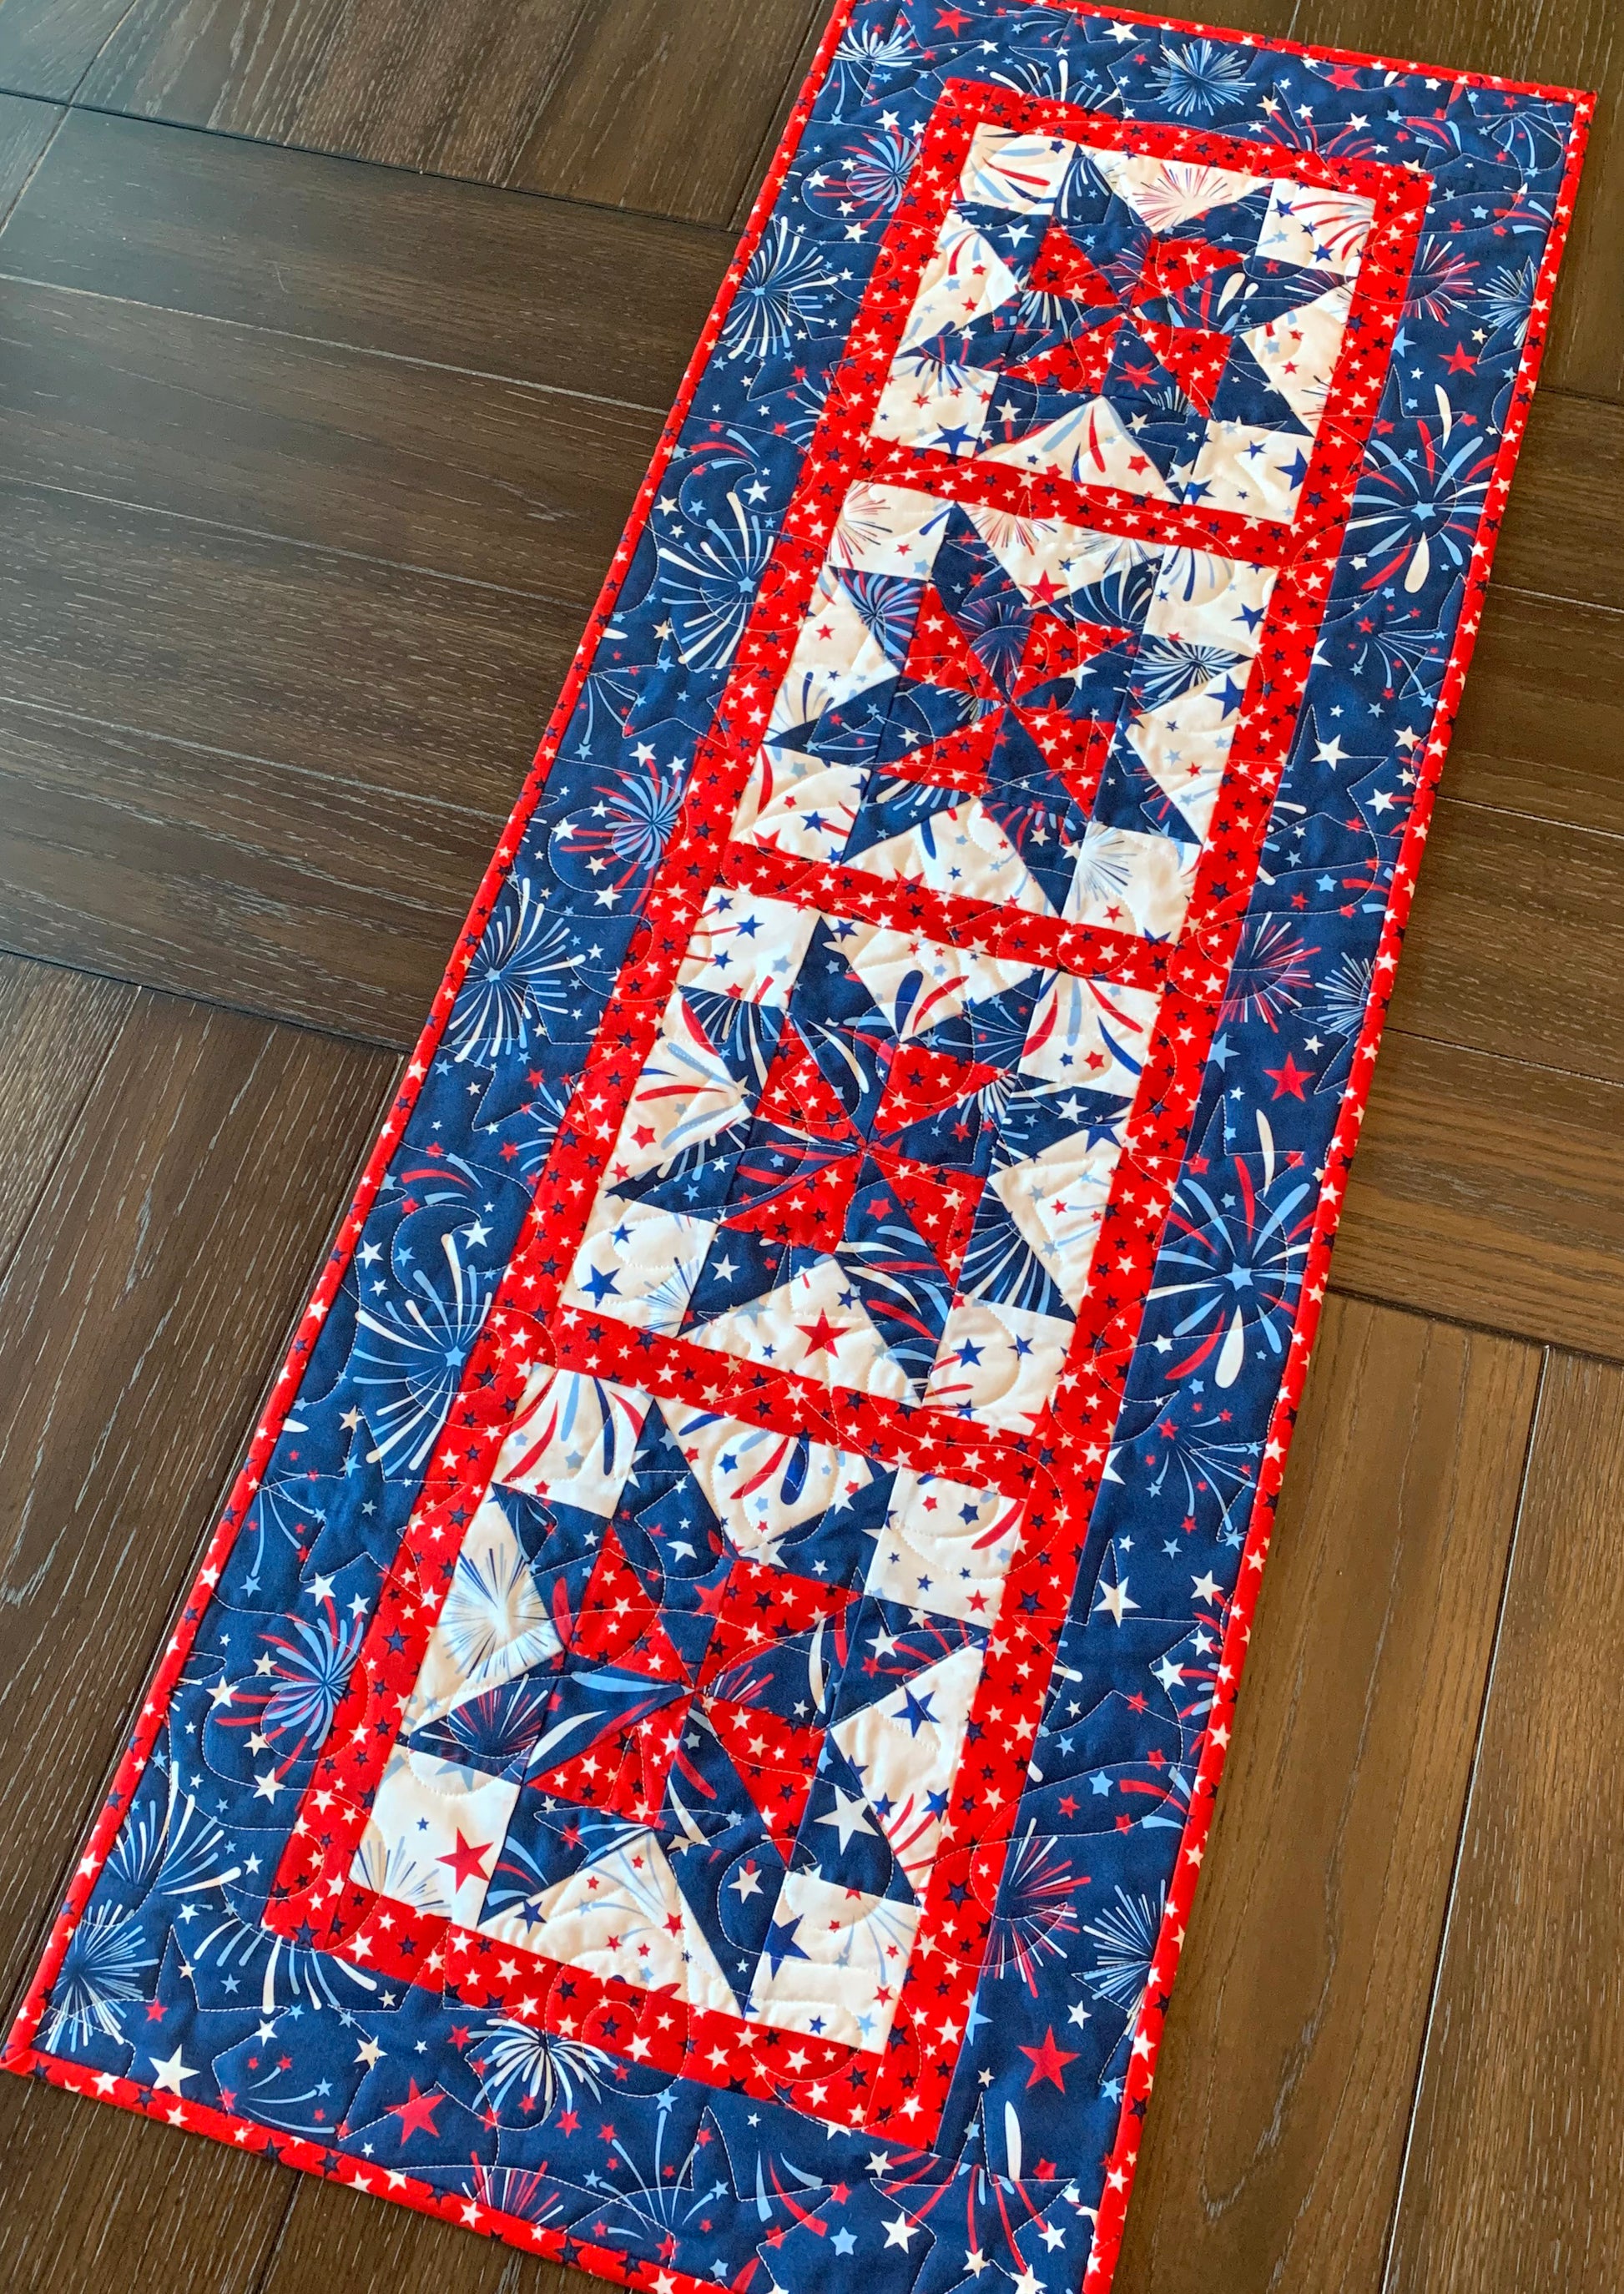 Red white and blue patriotic table runner pattern with four center star blocks that have a pinwheel in the center. The runner has red star sashing between the blocks and a blue fireworks border. Runner is shown displayed on a table.